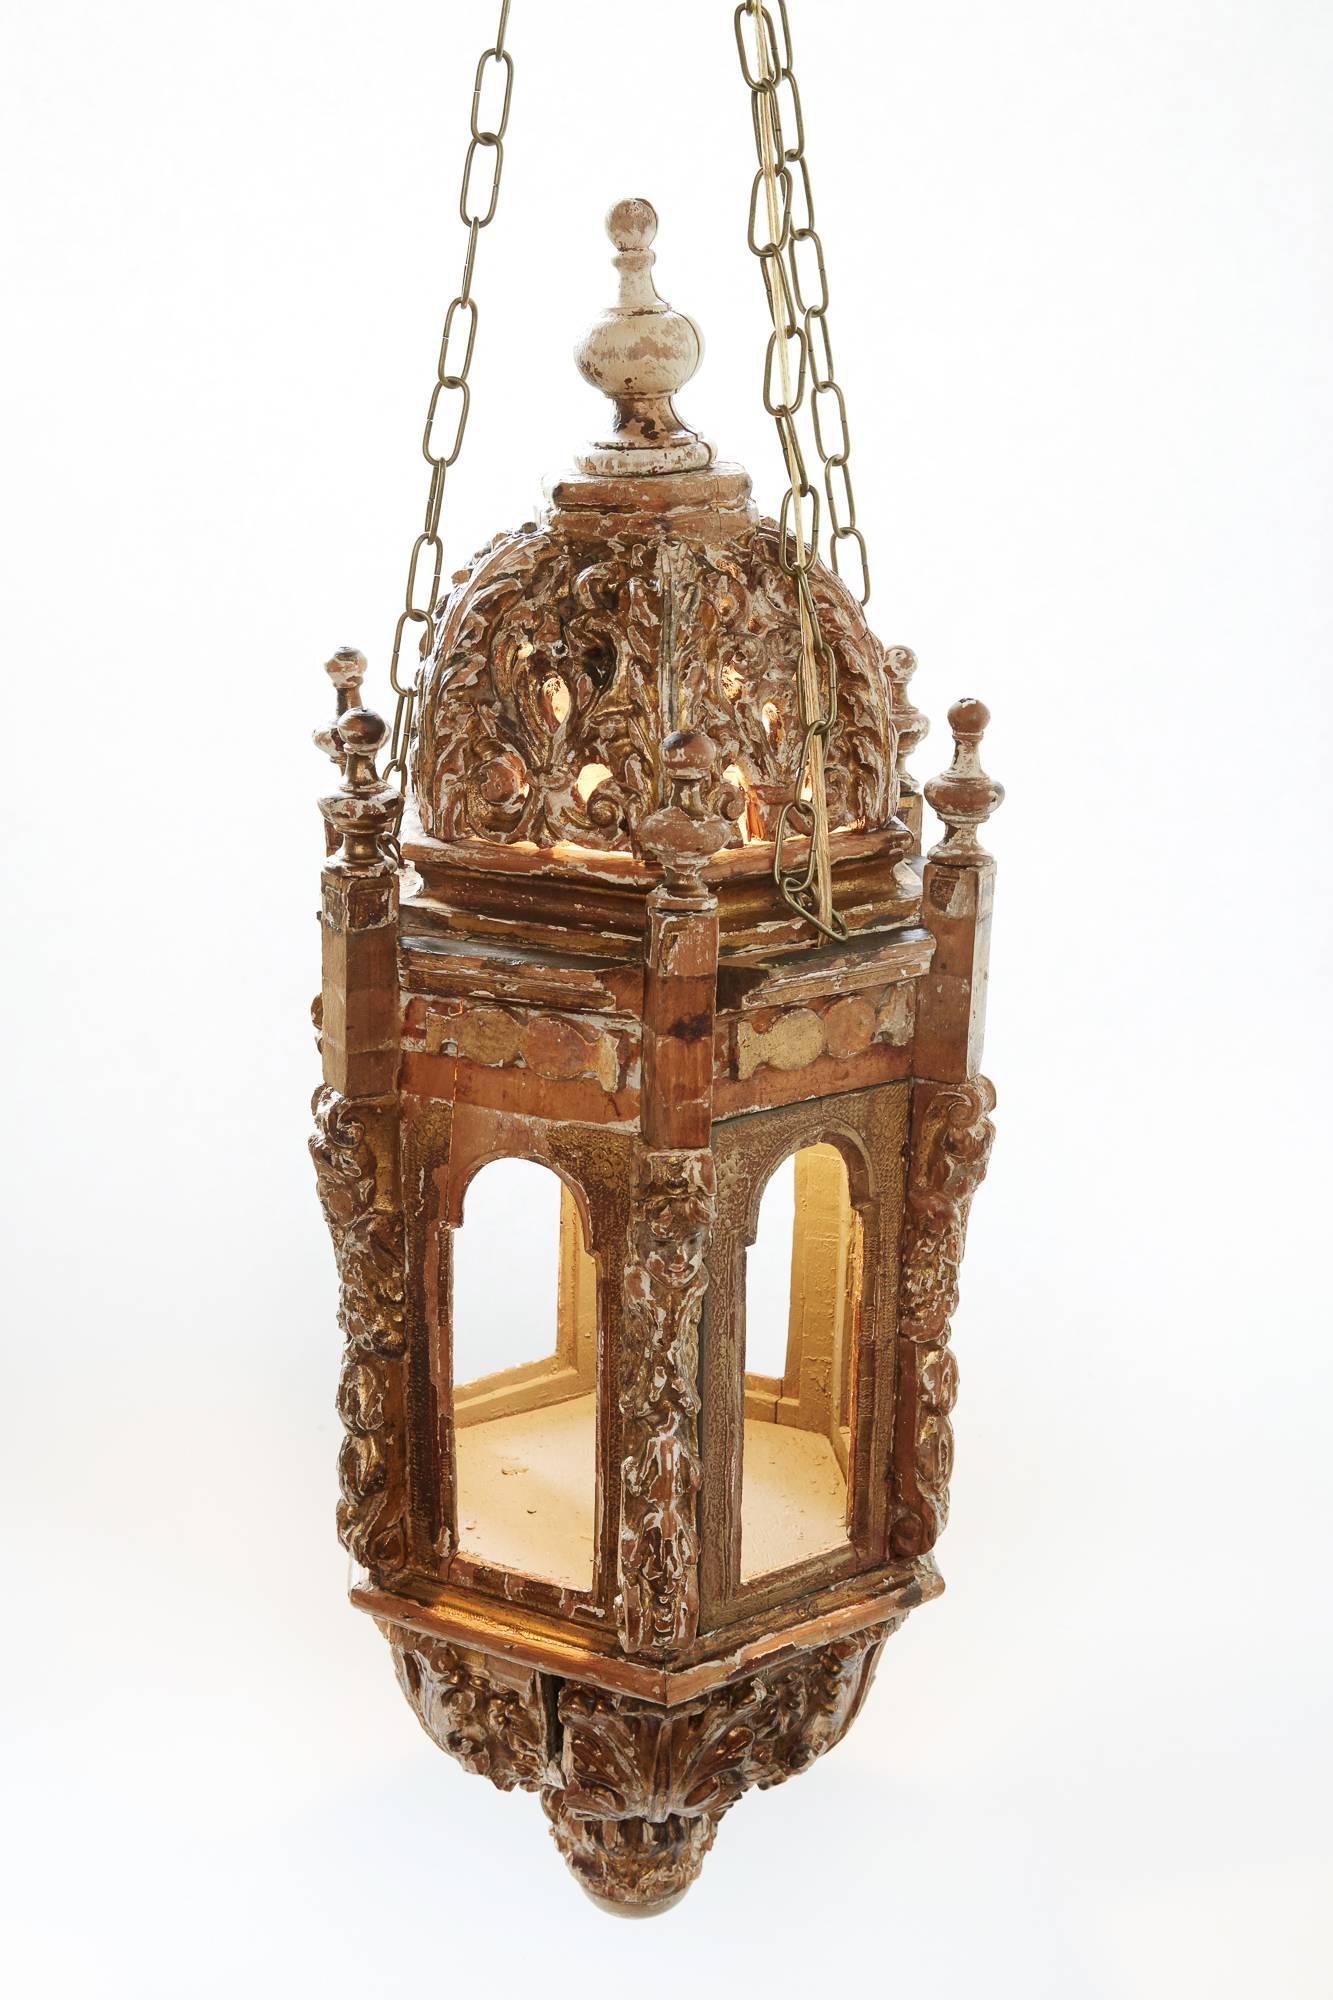 Pair of 18th century Italian Giltwood Lanterns found in England
The details of the lanterns reflects the period of fabrication. The remaining gilt is evident but not prevalent. The pieces were originally candle lit lanterns on posts which were held